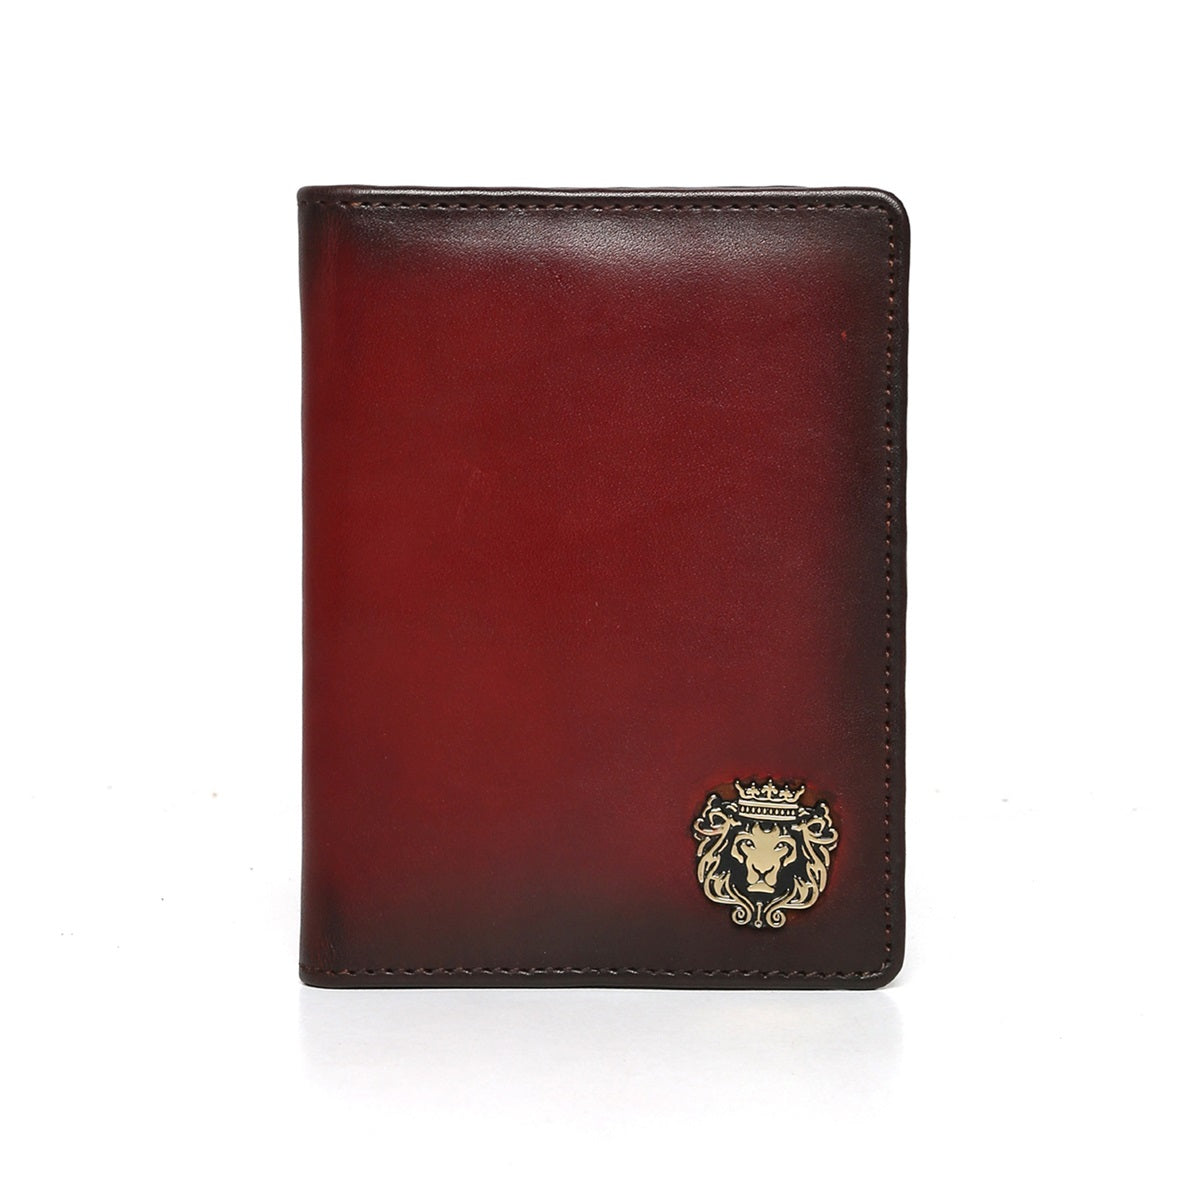 Wine Two Fold Passport Holder in Leather with card and wallet slots